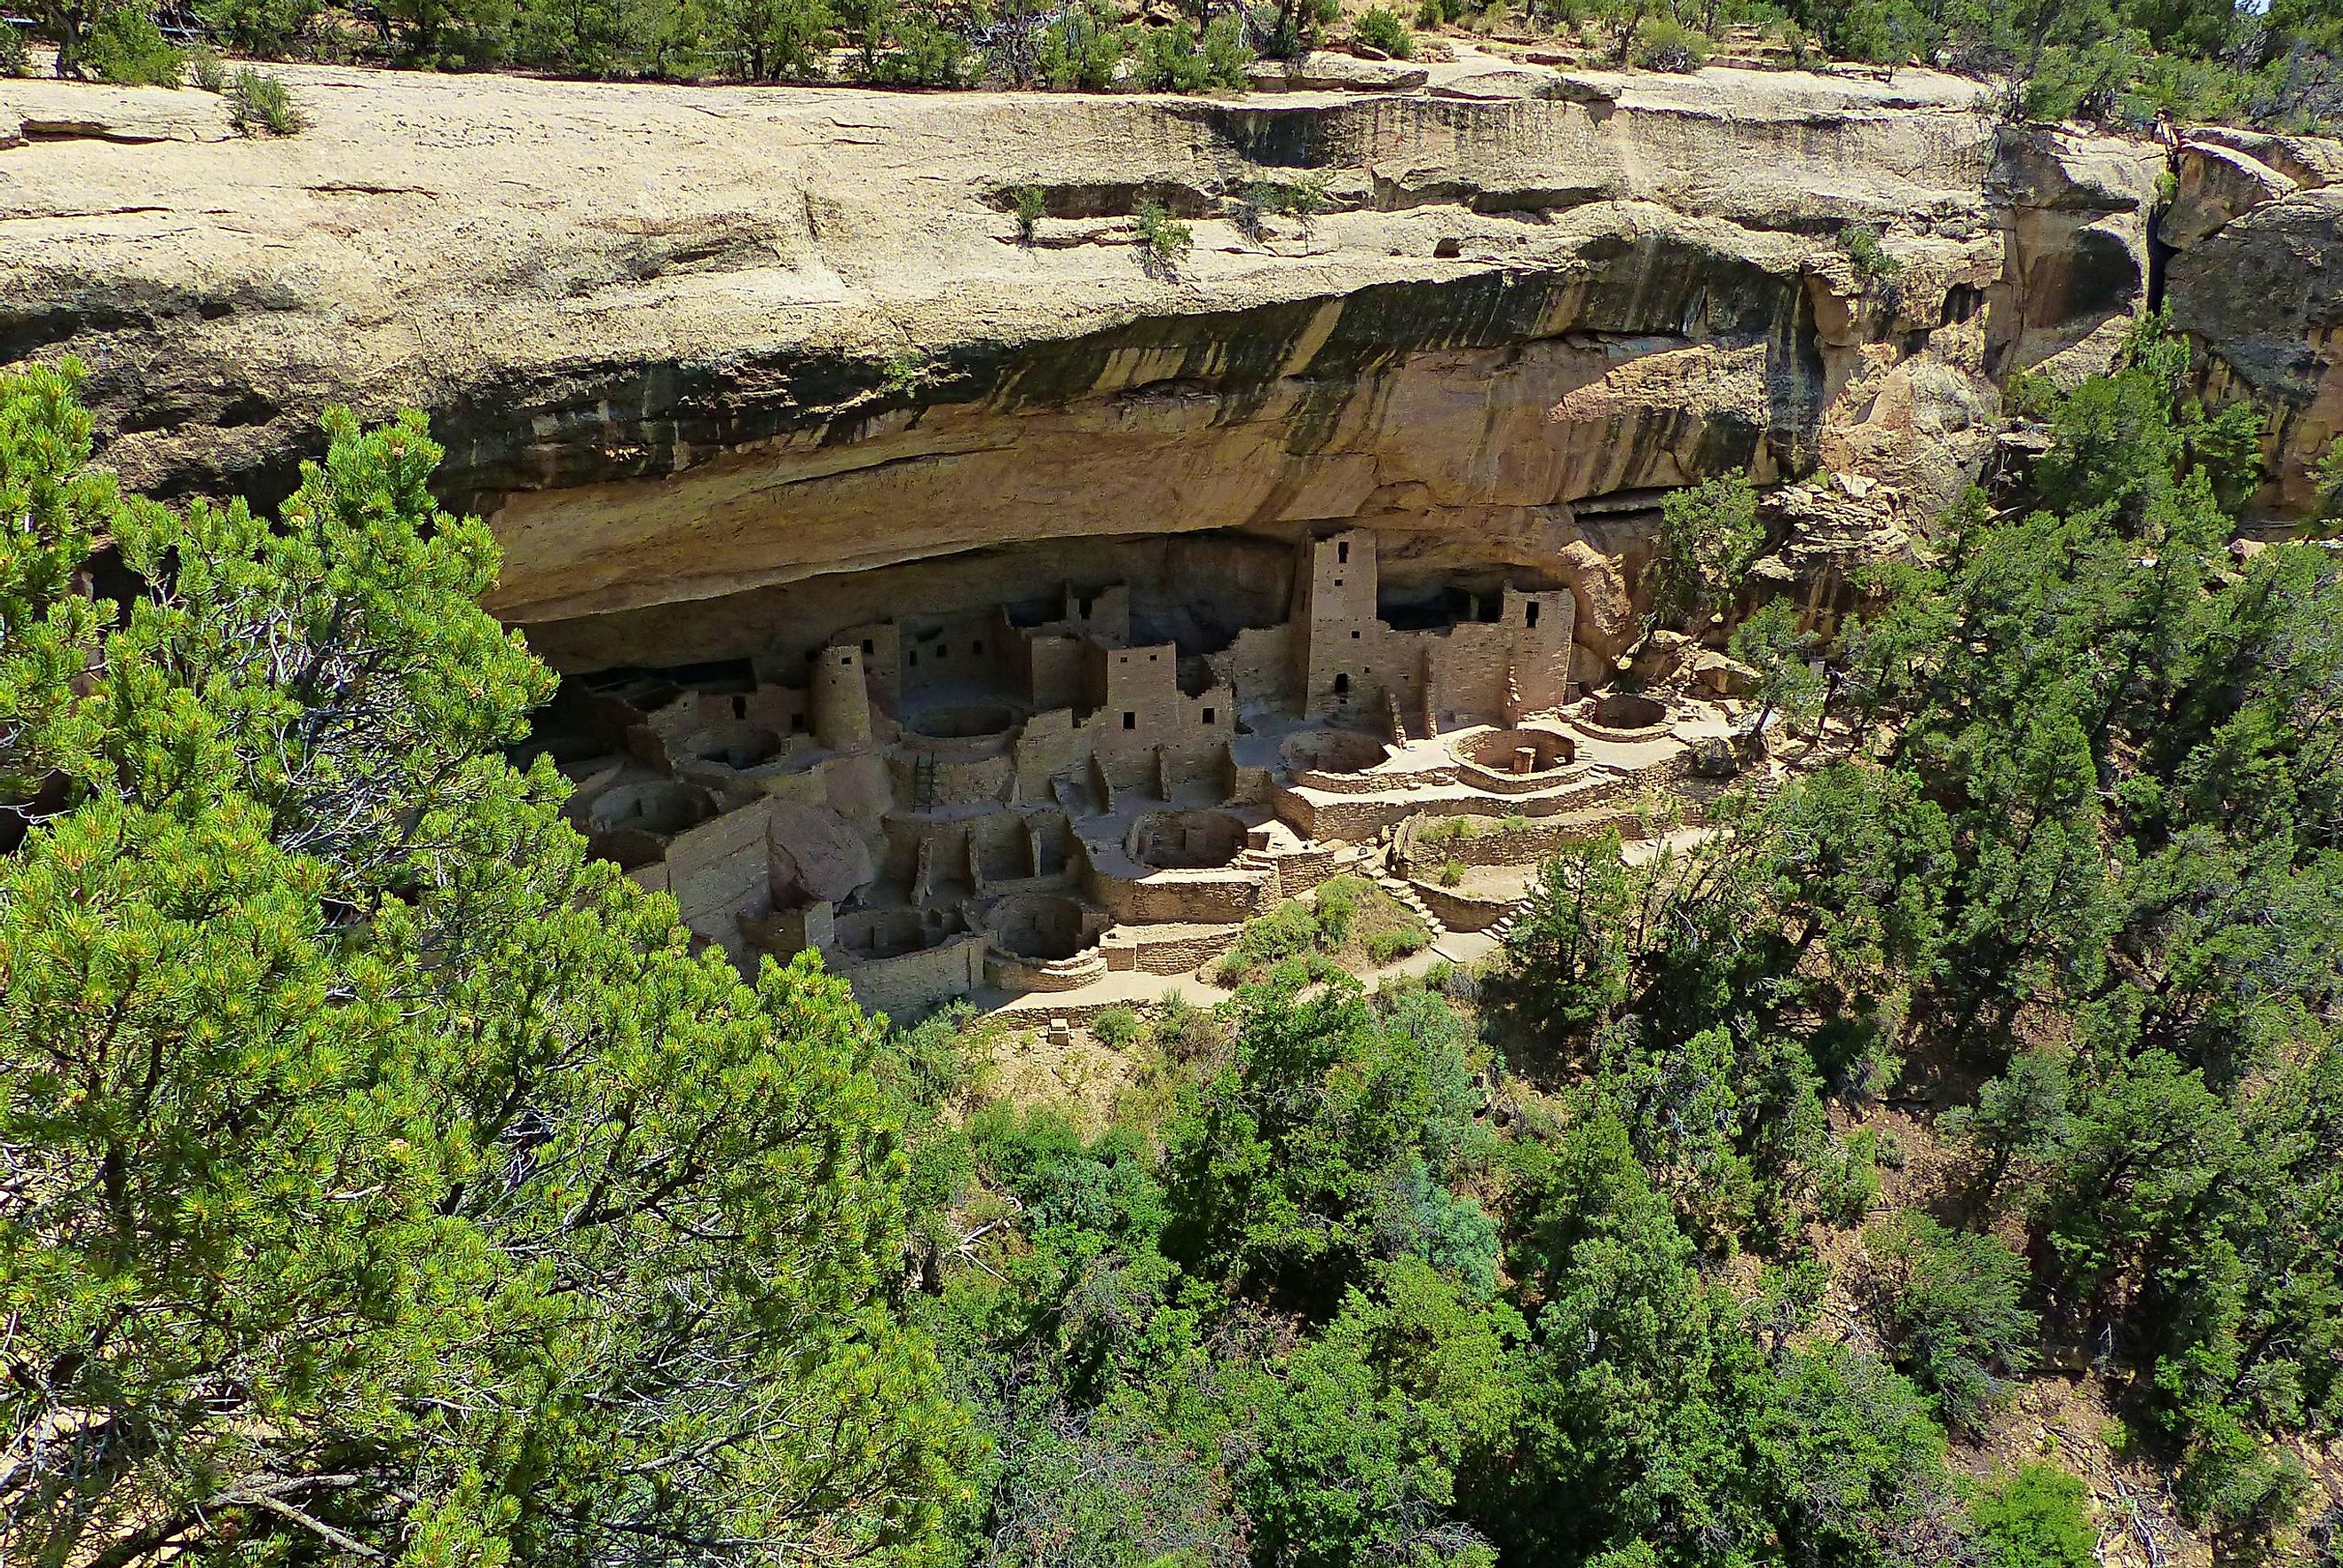 The Cliff Palace Pueblo indian ruins are snuggled under a cliff at Mesa Verde National Park in Colorado. Image credit Andrew Tuttle via Shutterstock